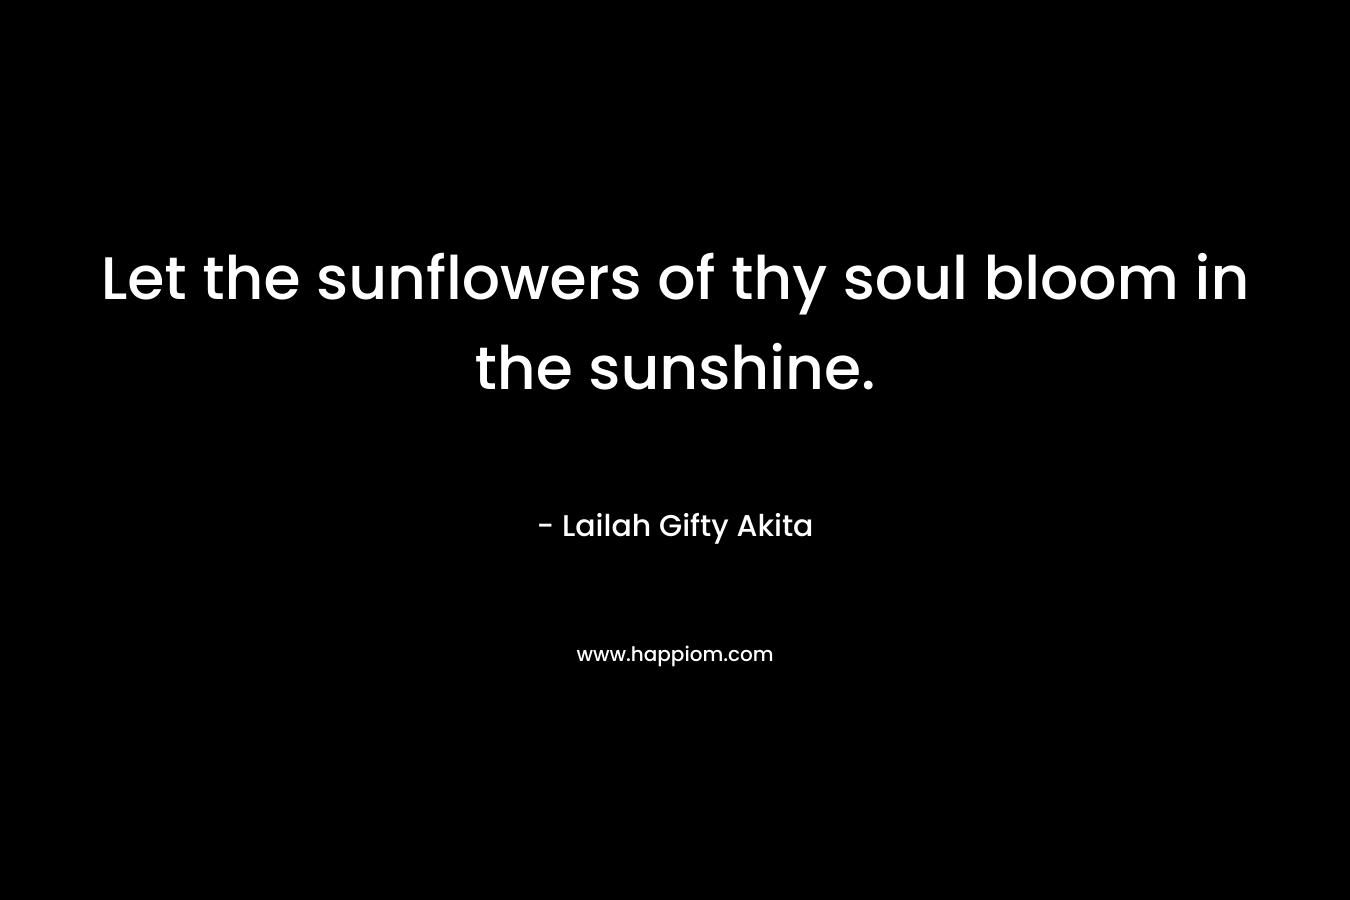 Let the sunflowers of thy soul bloom in the sunshine. – Lailah Gifty Akita